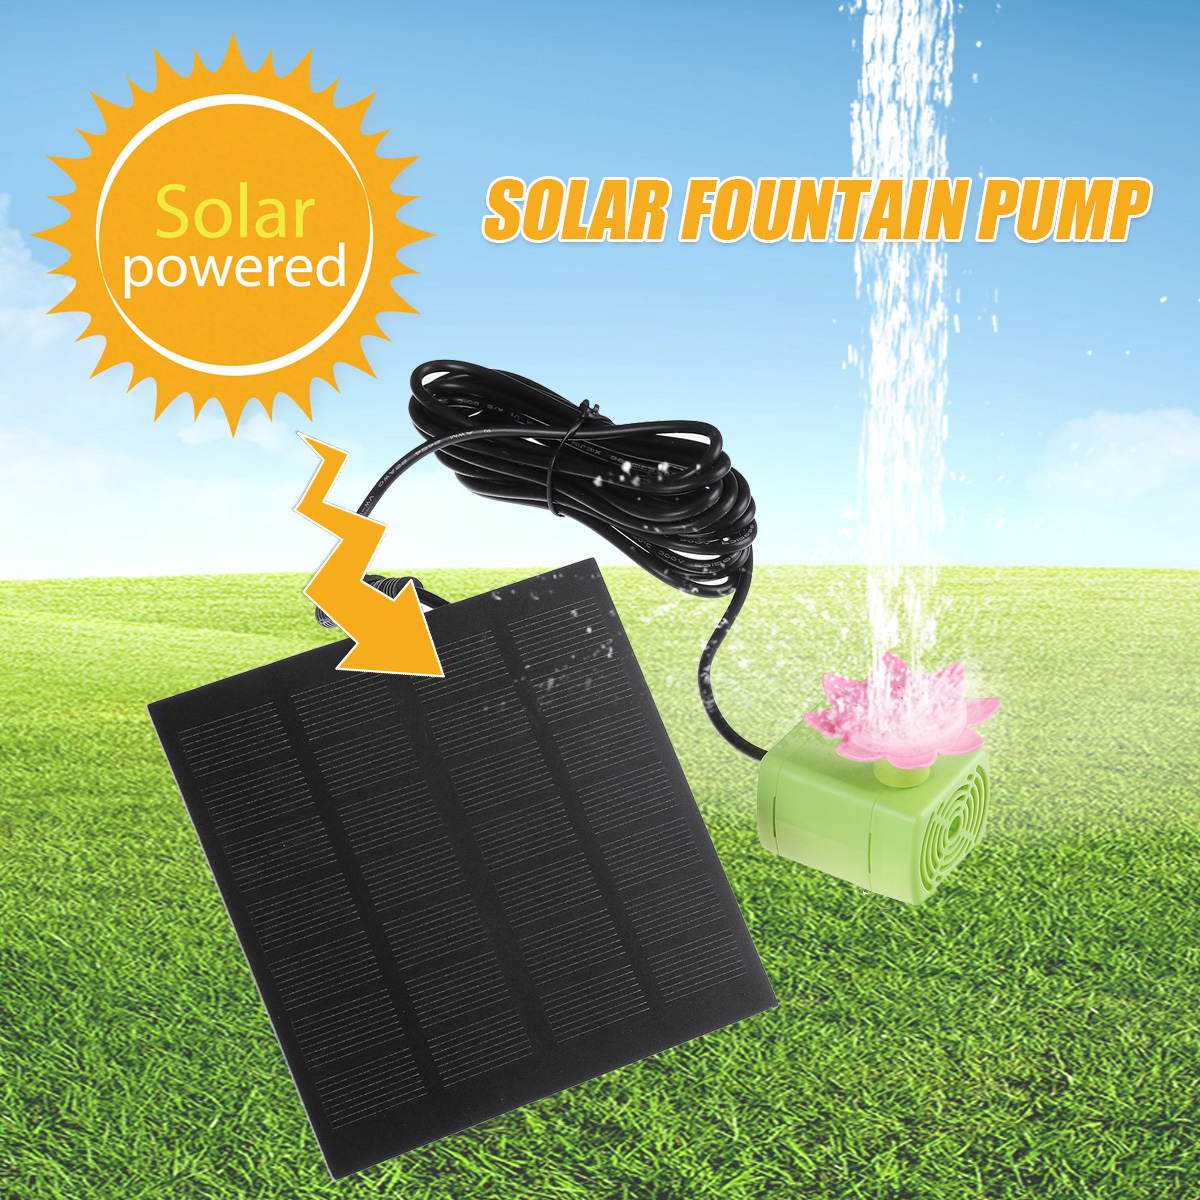 7V-14W-Solar-Powered-Water-Fountain-Pumps-Floating-Fountains-Pump-Waterproof-Home-Pond-Garden-Decor-1839781-3